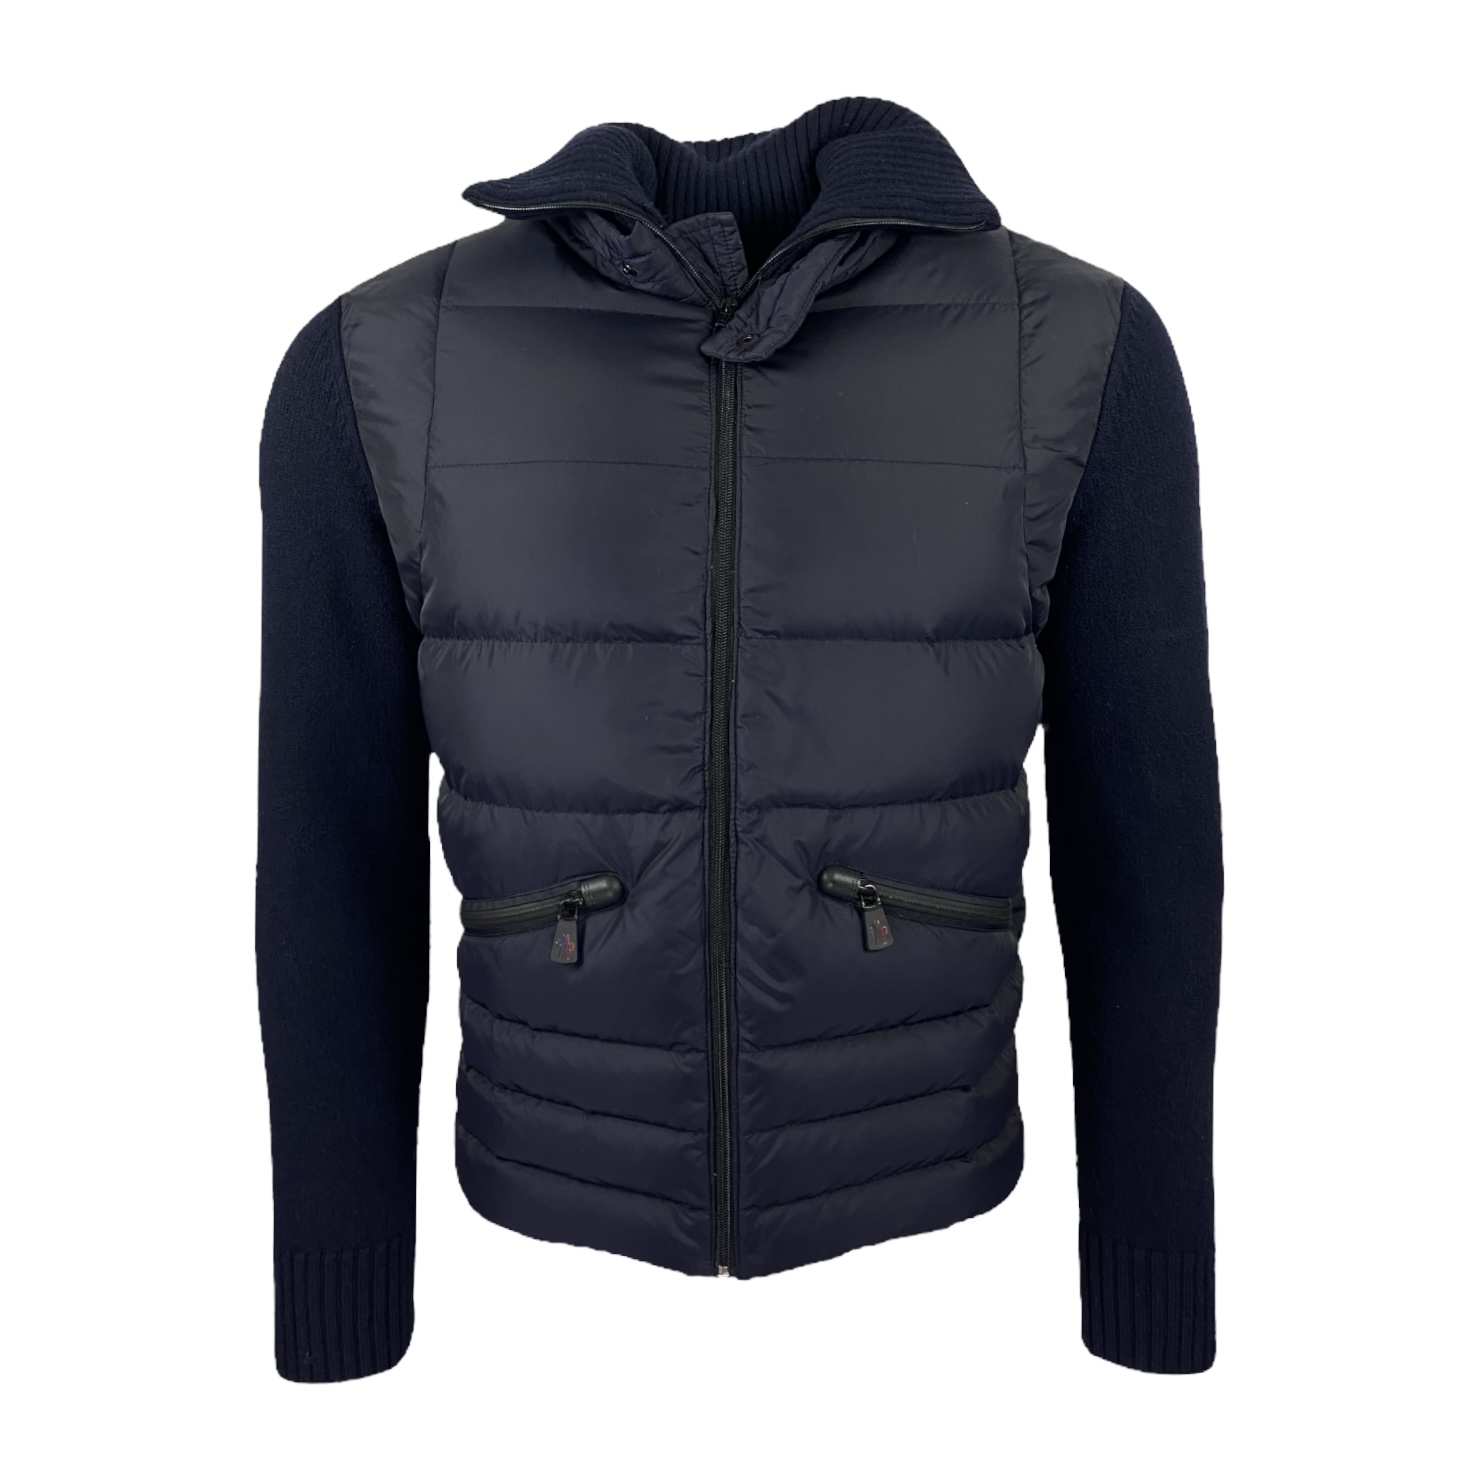 Moncler Grenoble Tricot Cardigan